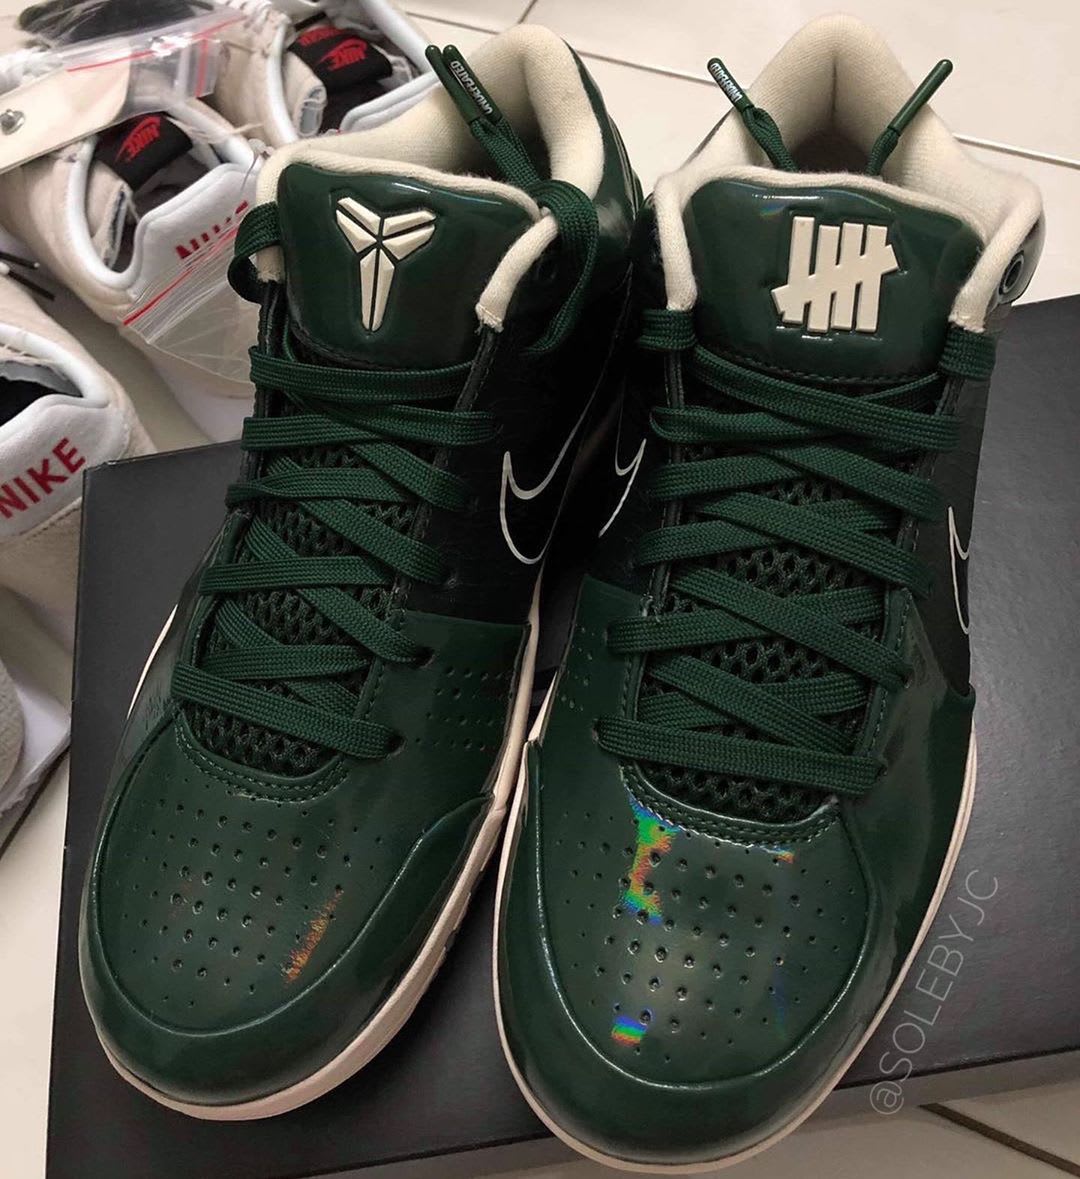 Undefeated Nike Kobe 4 Fir Green Release Date Front